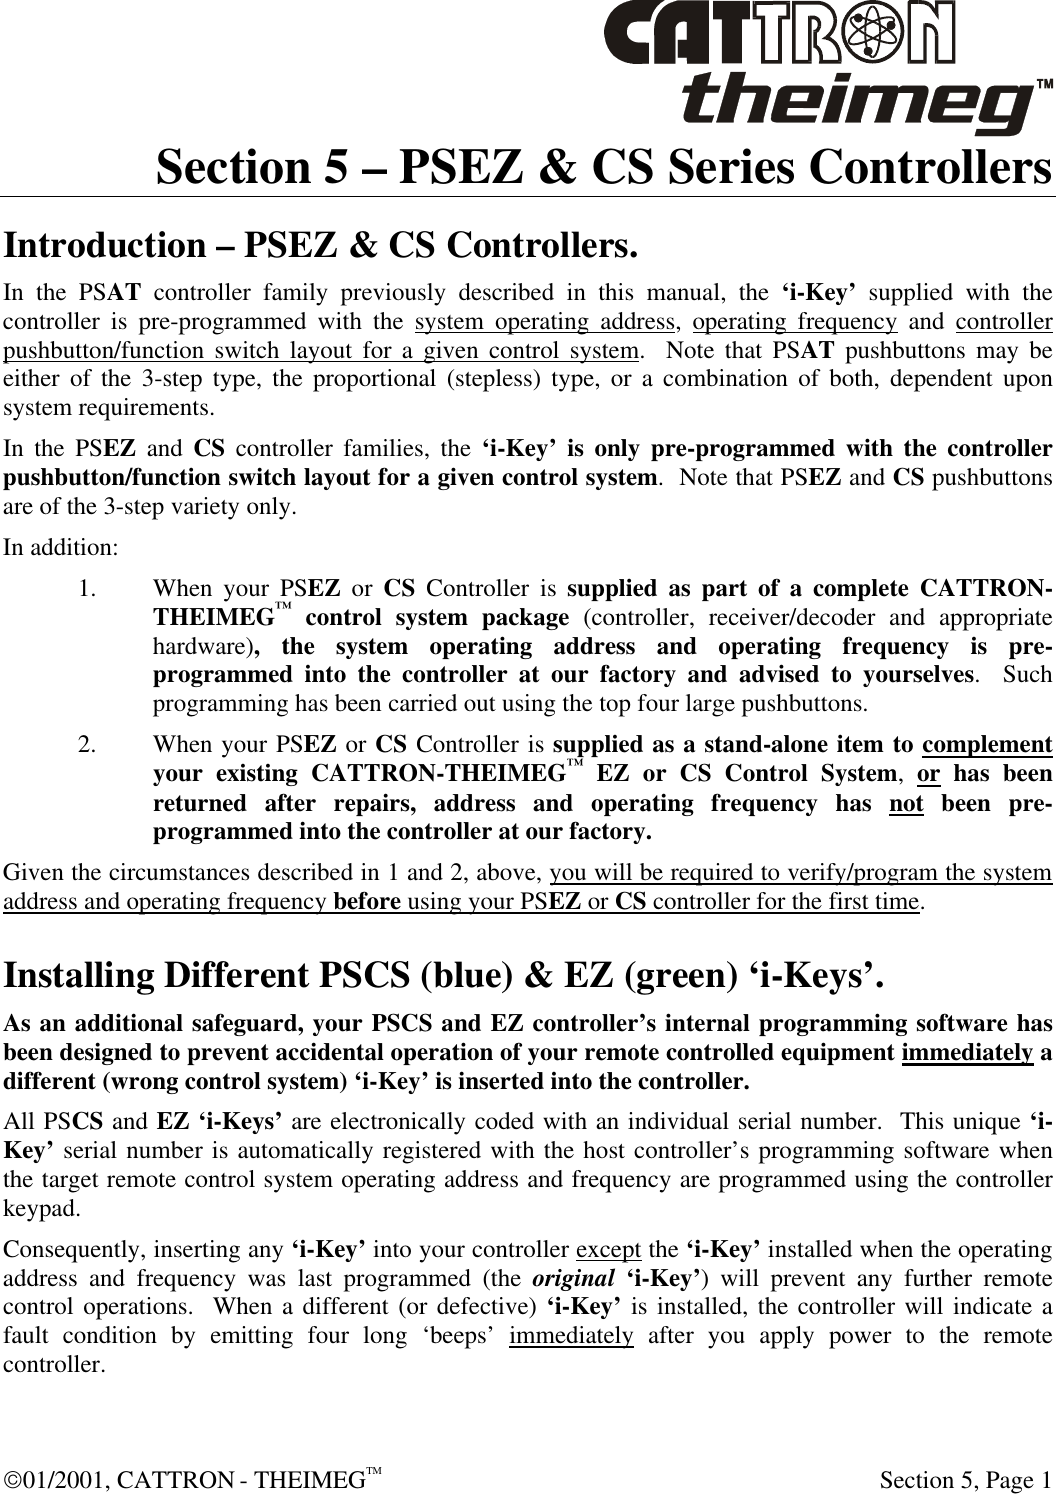  01/2001, CATTRON - THEIMEGTM  Section 5, Page 1 Section 5 – PSEZ &amp; CS Series Controllers Introduction – PSEZ &amp; CS Controllers. In the PSAT controller family previously described in this manual, the ‘i-Key’ supplied with the controller is pre-programmed with the system operating address, operating frequency and controller pushbutton/function switch layout for a given control system.  Note that PSAT pushbuttons may be either of the 3-step type, the proportional (stepless) type, or a combination of both, dependent upon system requirements.  In the PSEZ and CS controller families, the ‘i-Key’ is only pre-programmed with the controller pushbutton/function switch layout for a given control system.  Note that PSEZ and CS pushbuttons are of the 3-step variety only. In addition: 1. When your PSEZ or CS Controller is supplied as part of a complete CATTRON-THEIMEG™ control system package (controller, receiver/decoder and appropriate hardware), the system operating address and operating frequency is pre-programmed into the controller at our factory and advised to yourselves.  Such programming has been carried out using the top four large pushbuttons.   2. When your PSEZ or CS Controller is supplied as a stand-alone item to complement your existing CATTRON-THEIMEG™ EZ or CS Control System, or has been returned after repairs, address and operating frequency has not been pre-programmed into the controller at our factory.  Given the circumstances described in 1 and 2, above, you will be required to verify/program the system address and operating frequency before using your PSEZ or CS controller for the first time.  Installing Different PSCS (blue) &amp; EZ (green) ‘i-Keys’. As an additional safeguard, your PSCS and EZ controller’s internal programming software has been designed to prevent accidental operation of your remote controlled equipment immediately a different (wrong control system) ‘i-Key’ is inserted into the controller.  All PSCS and EZ ‘i-Keys’ are electronically coded with an individual serial number.  This unique ‘i-Key’ serial number is automatically registered with the host controller’s programming software when the target remote control system operating address and frequency are programmed using the controller keypad.      Consequently, inserting any ‘i-Key’ into your controller except the ‘i-Key’ installed when the operating address and frequency was last programmed (the original ‘i-Key’) will prevent any further remote control operations.  When a different (or defective) ‘i-Key’ is installed, the controller will indicate a fault condition by emitting four long ‘beeps’ immediately after you apply power to the remote controller.  